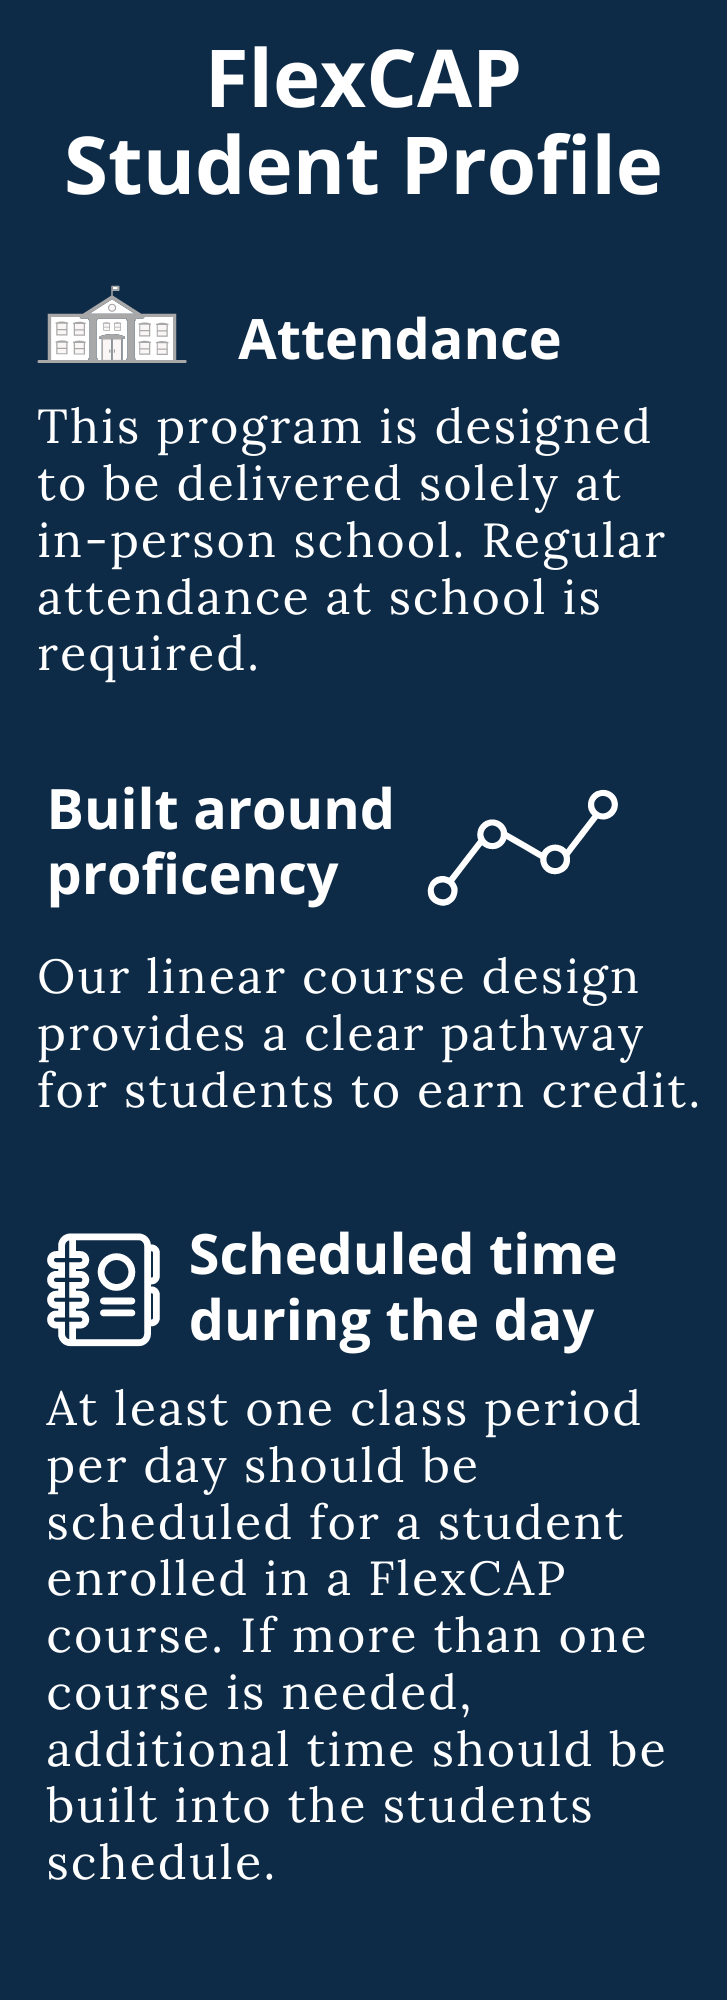 Infographic on the FlexCAP
Student Profile:
Our linear course design provides a clear pathway for students to earn credit.
Attendance:
This program is designed to be delivered solely at in-person school. Regular attendance at school is required.
Scheduled time during the day
At least one class period per day should be scheduled for a student enrolled in a FlexCAP course. If more than one course is needed, additional time should be built into the students schedule.